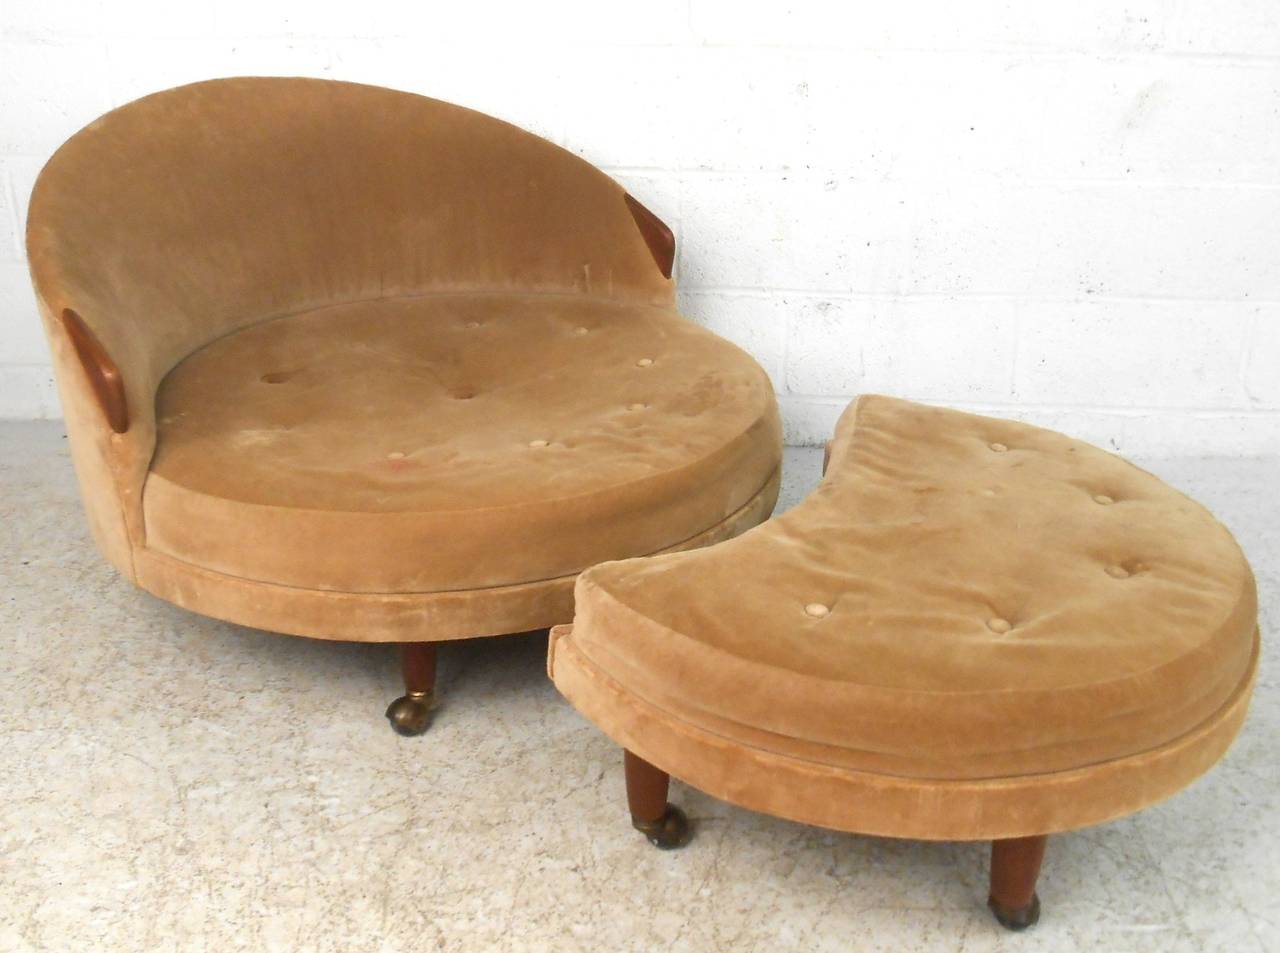 This matching mid-century lounge chair and ottoman features unique hardwood armrests and legs, and our both mounted on sturdy casters. Unique design brings wonderful modern style to any setting. Please confirm item location (NY or NJ).